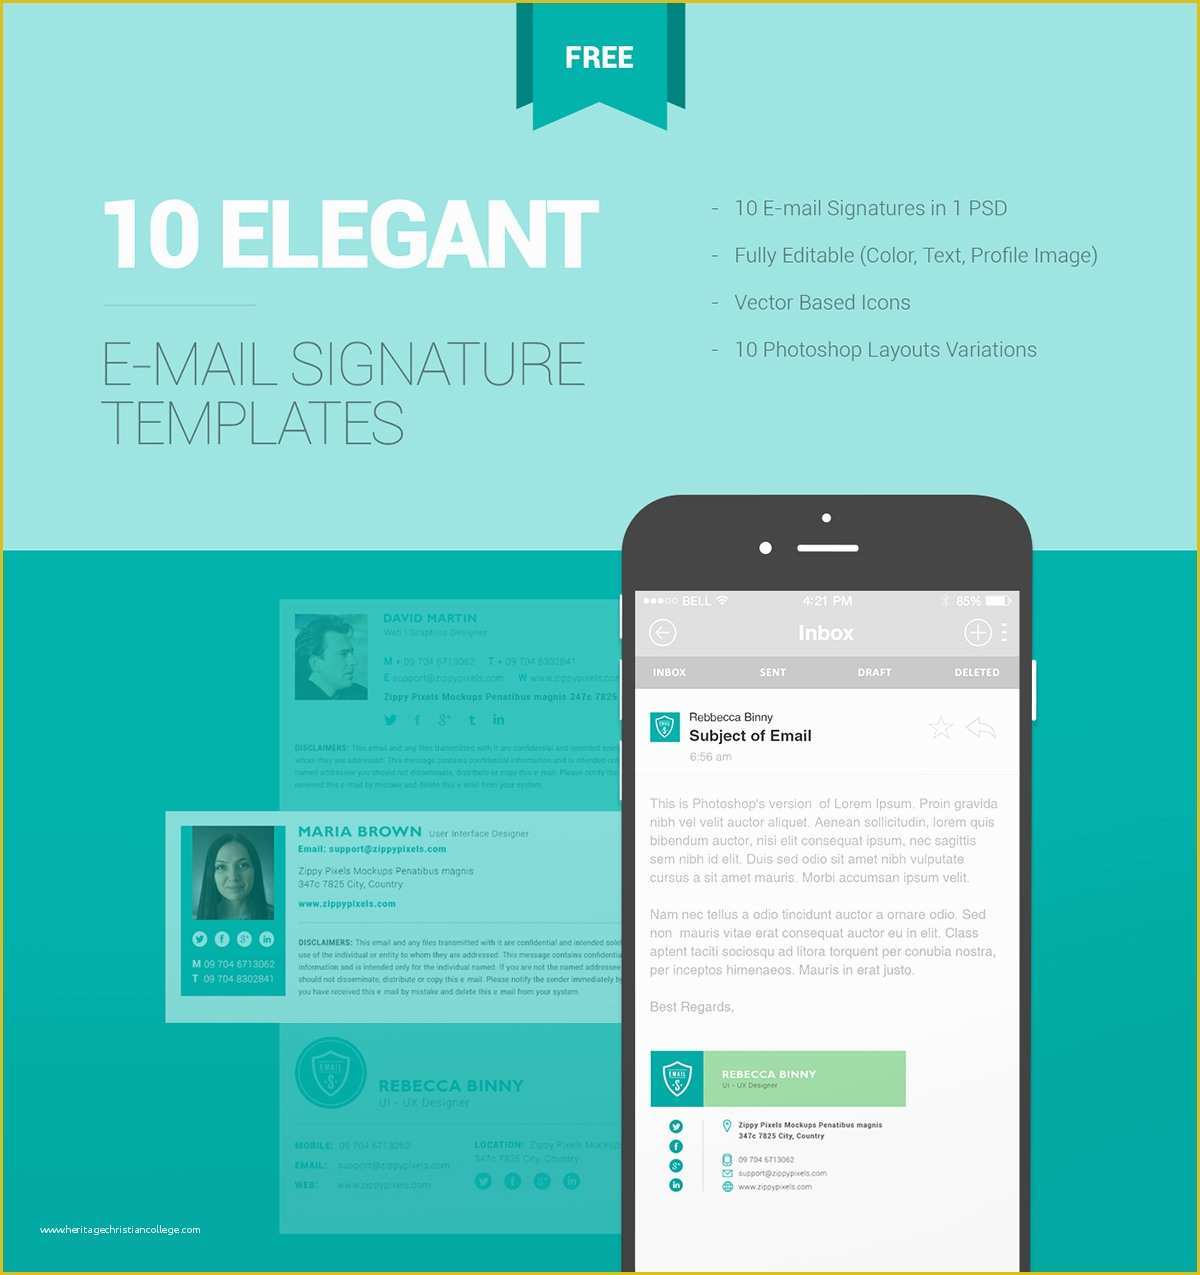 Free Email Signature Templates Of 10 Free Email Signature Templates with Elegant Designs On